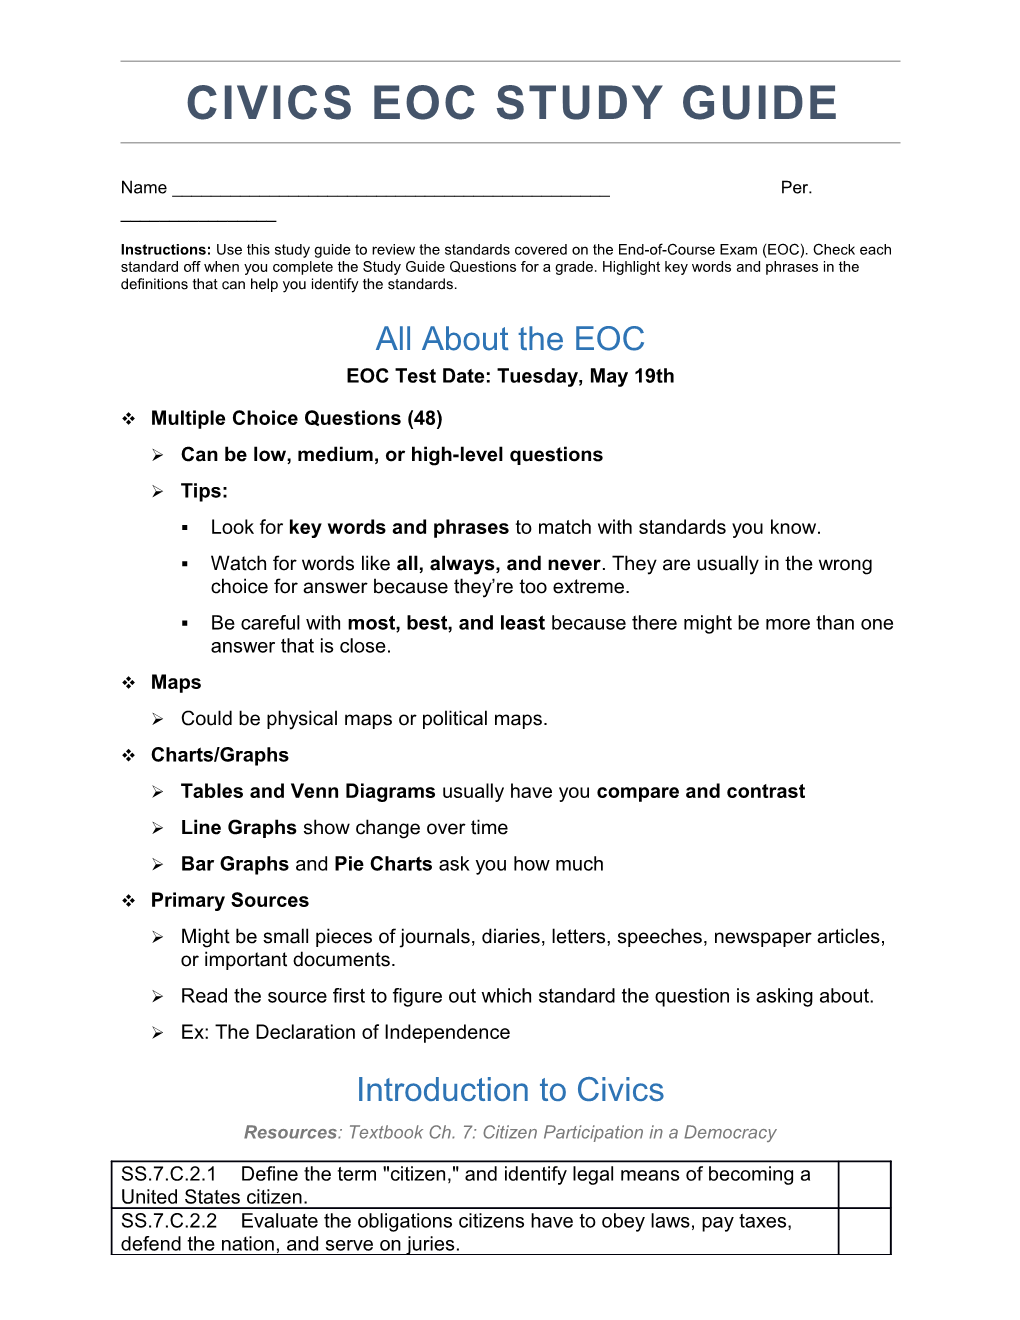 All About the EOC